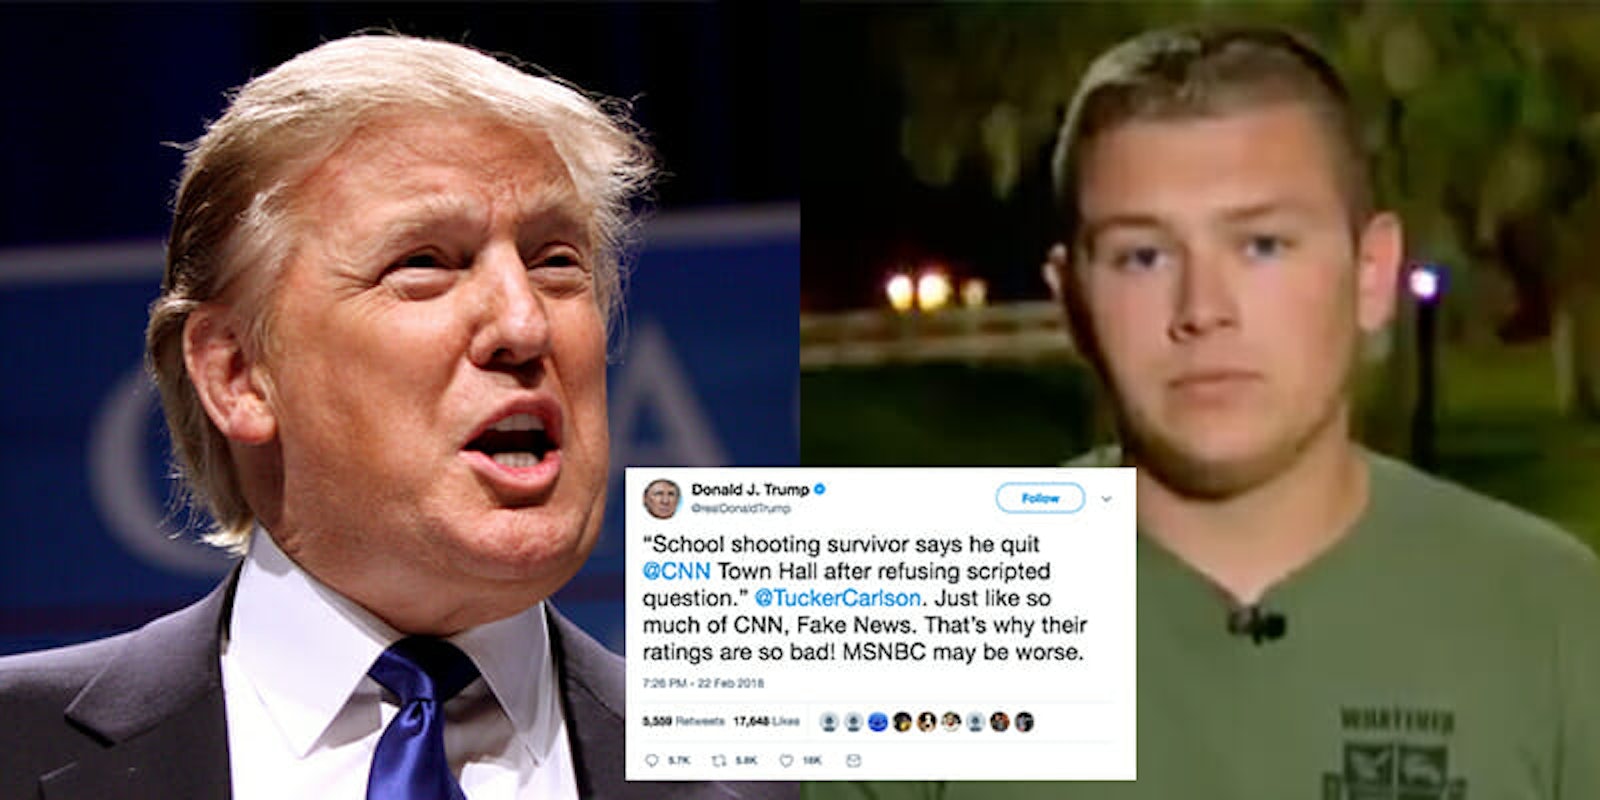 Trump tweeted that CNN is 'fake news' following reports that the outlet gave a 'scripted' question to a student for its town hall on gun control.